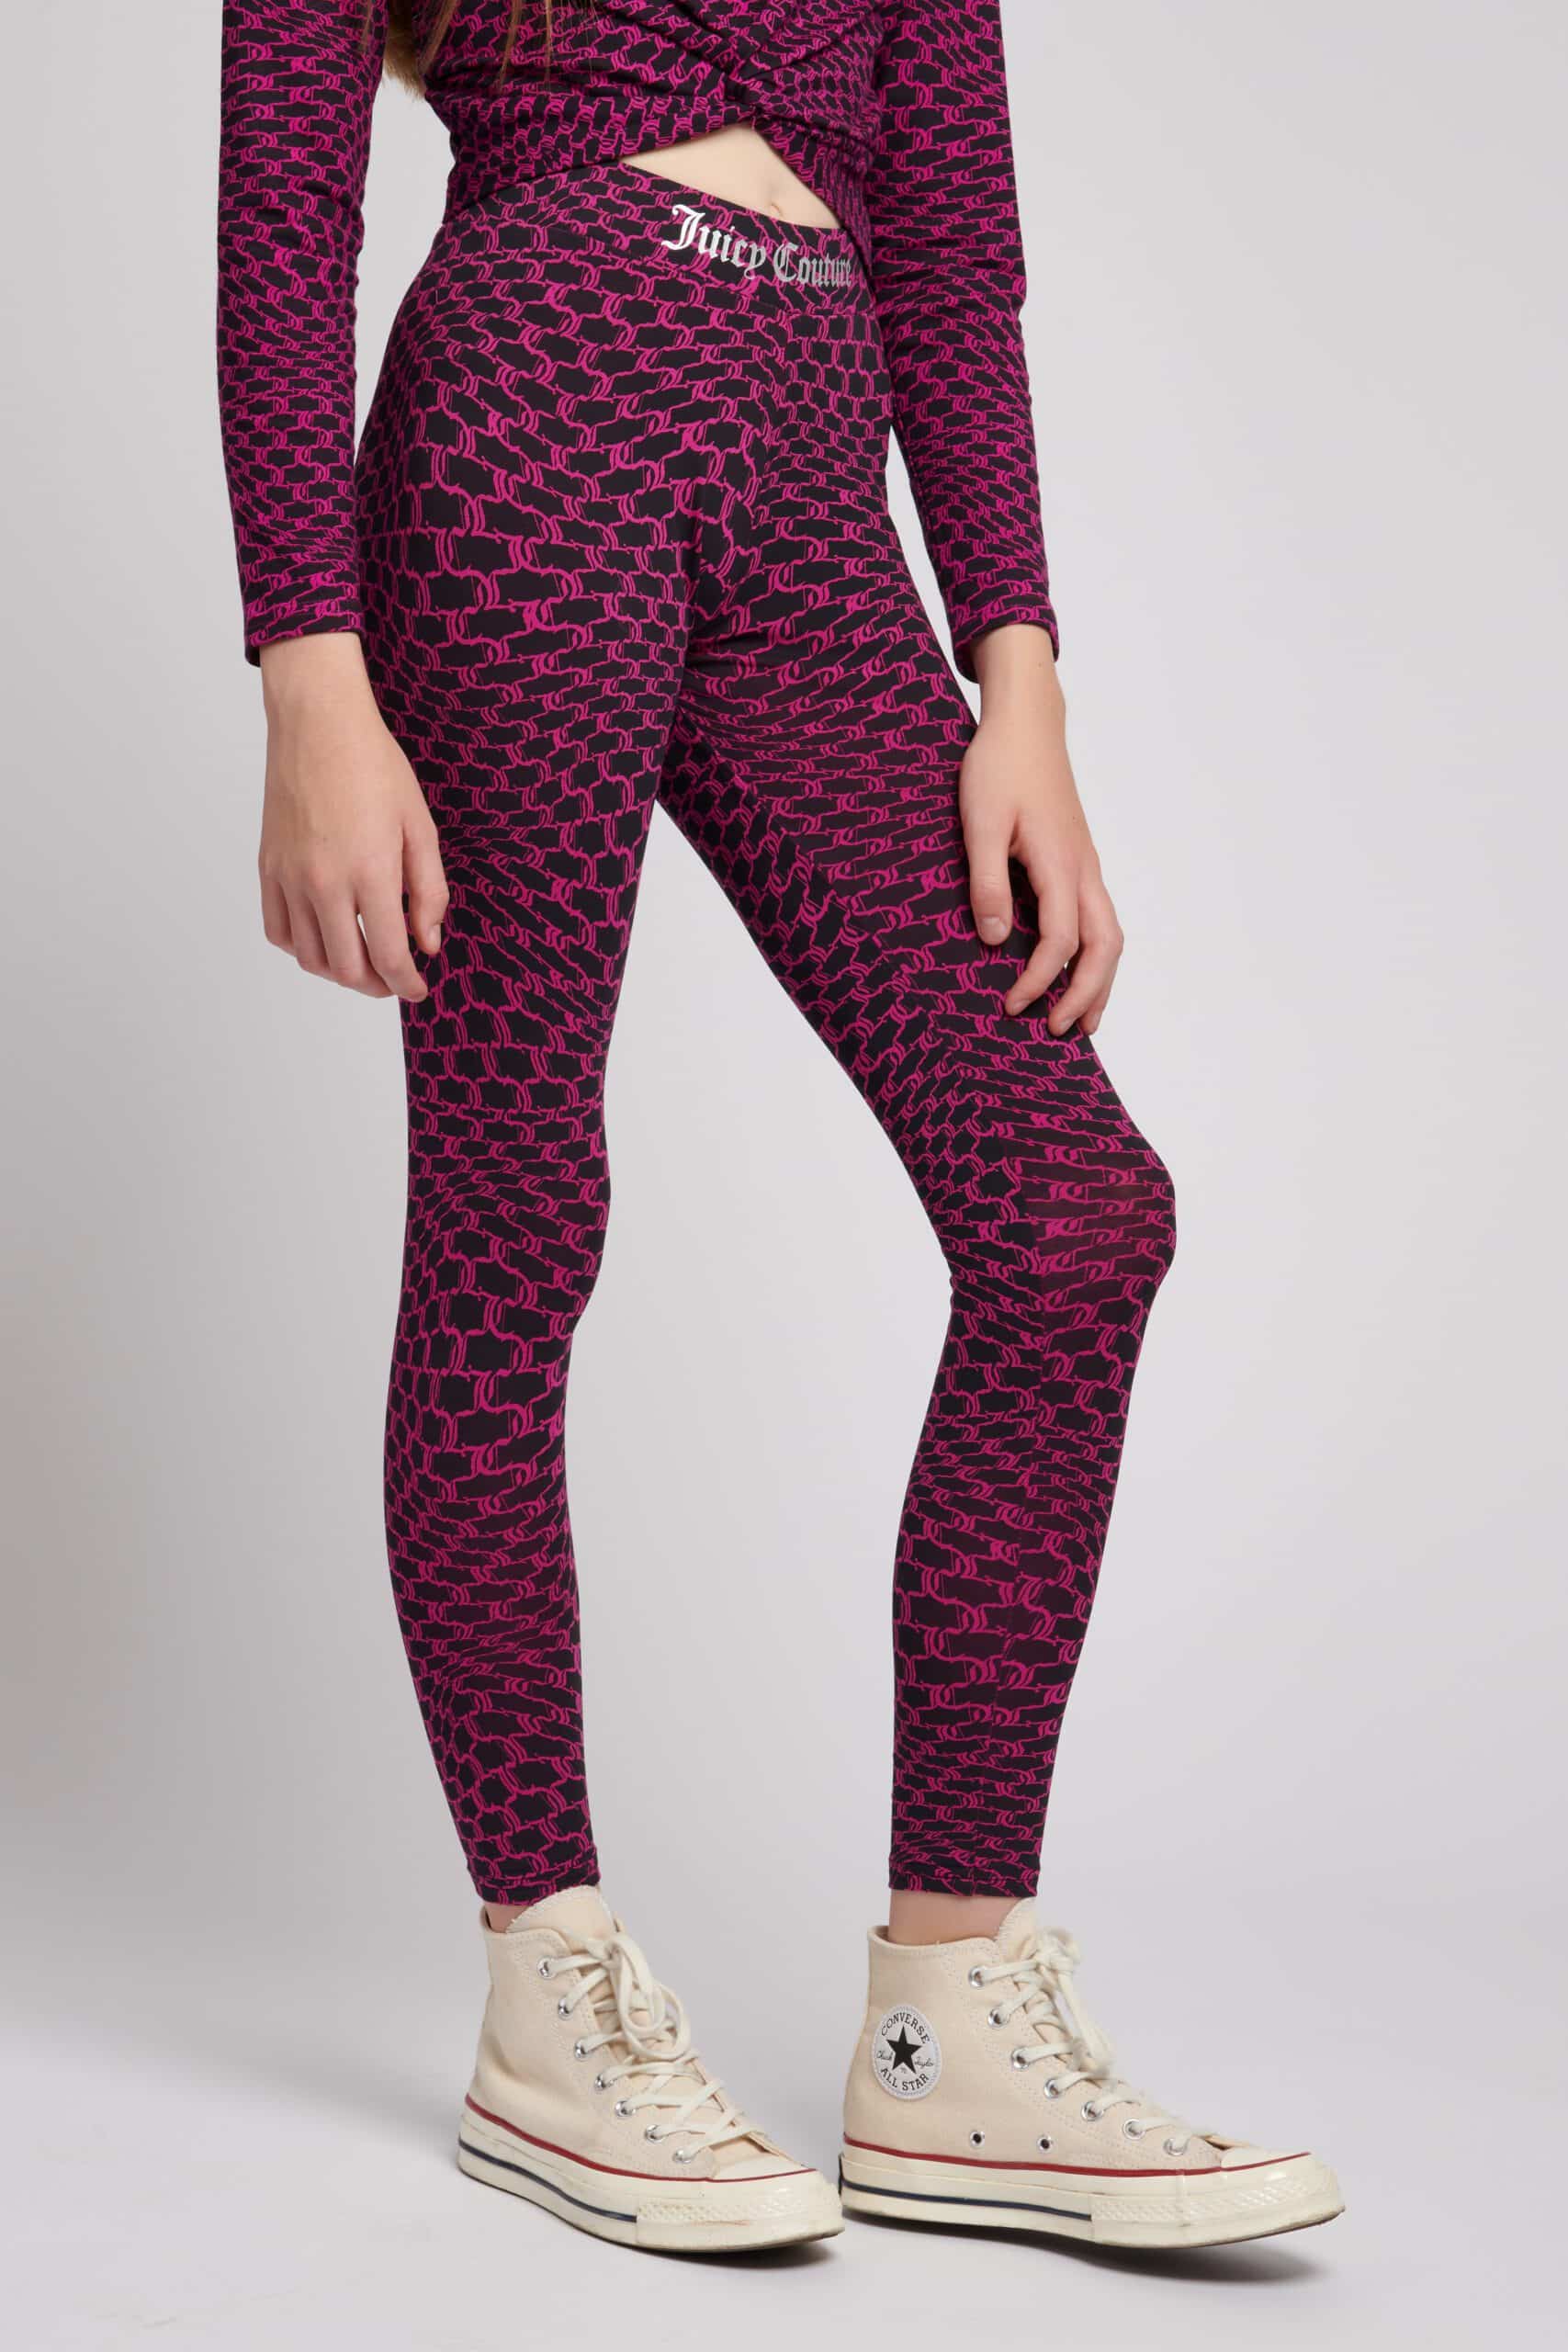 juicy couture pink patterned leggings